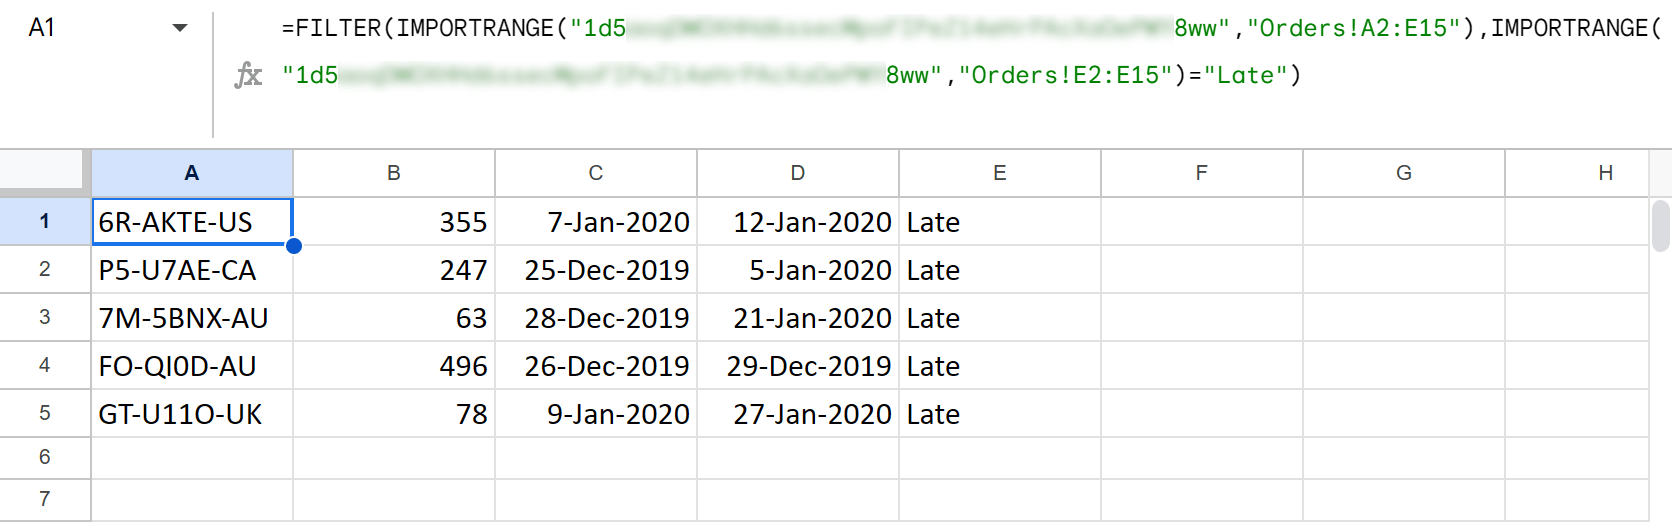 Filtering data from another Google Sheets file by text.